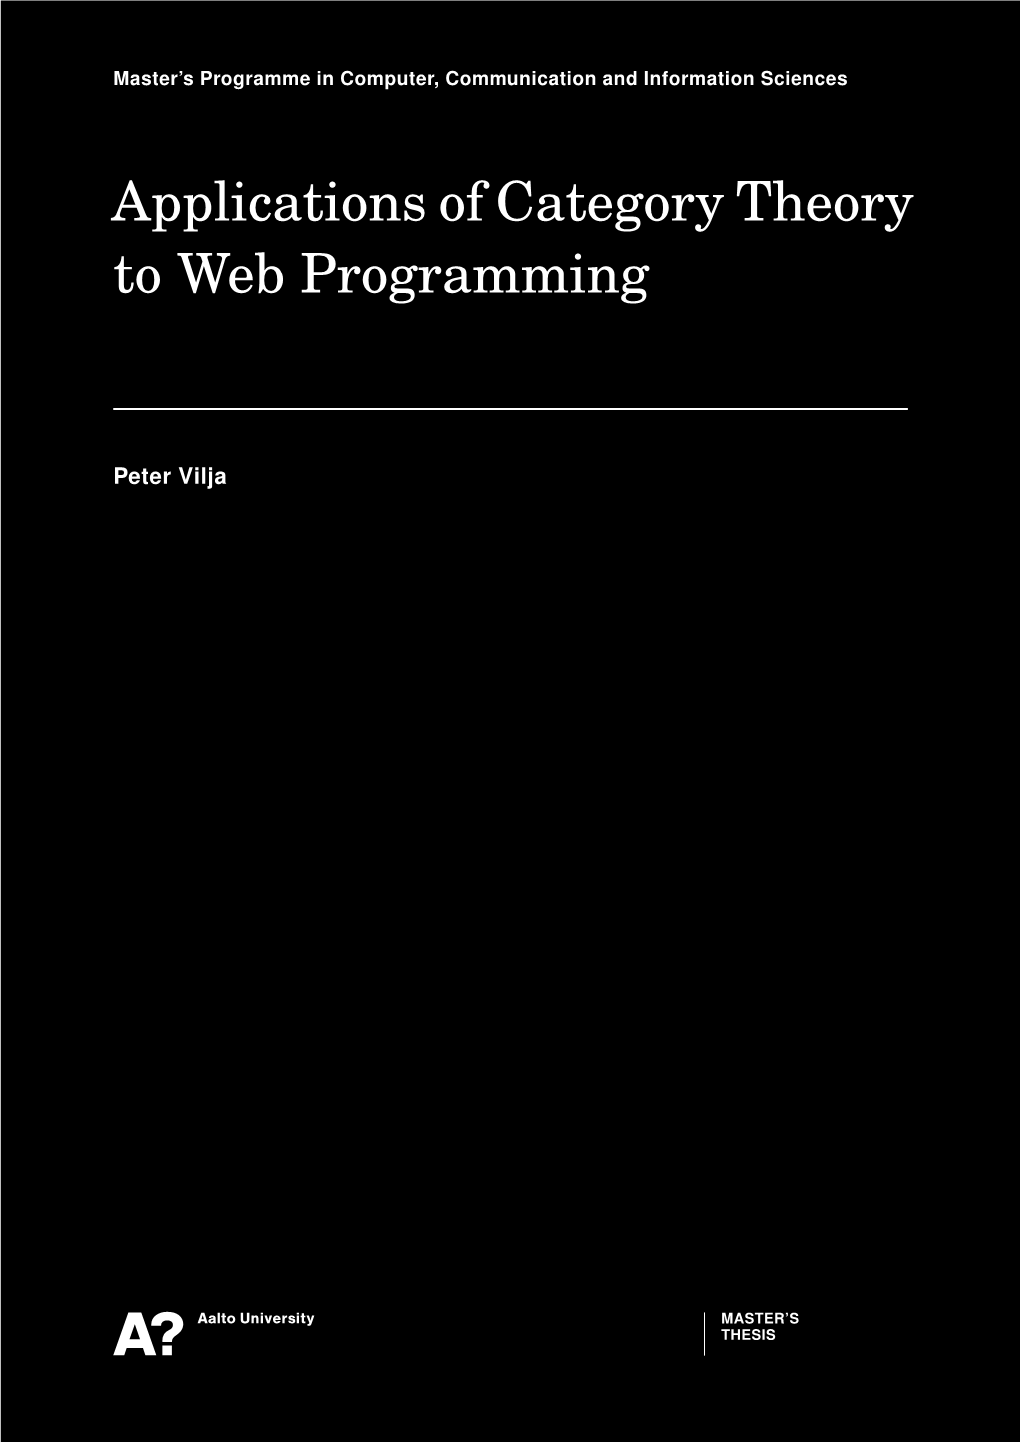 Applications of Category Theory to Web Programming